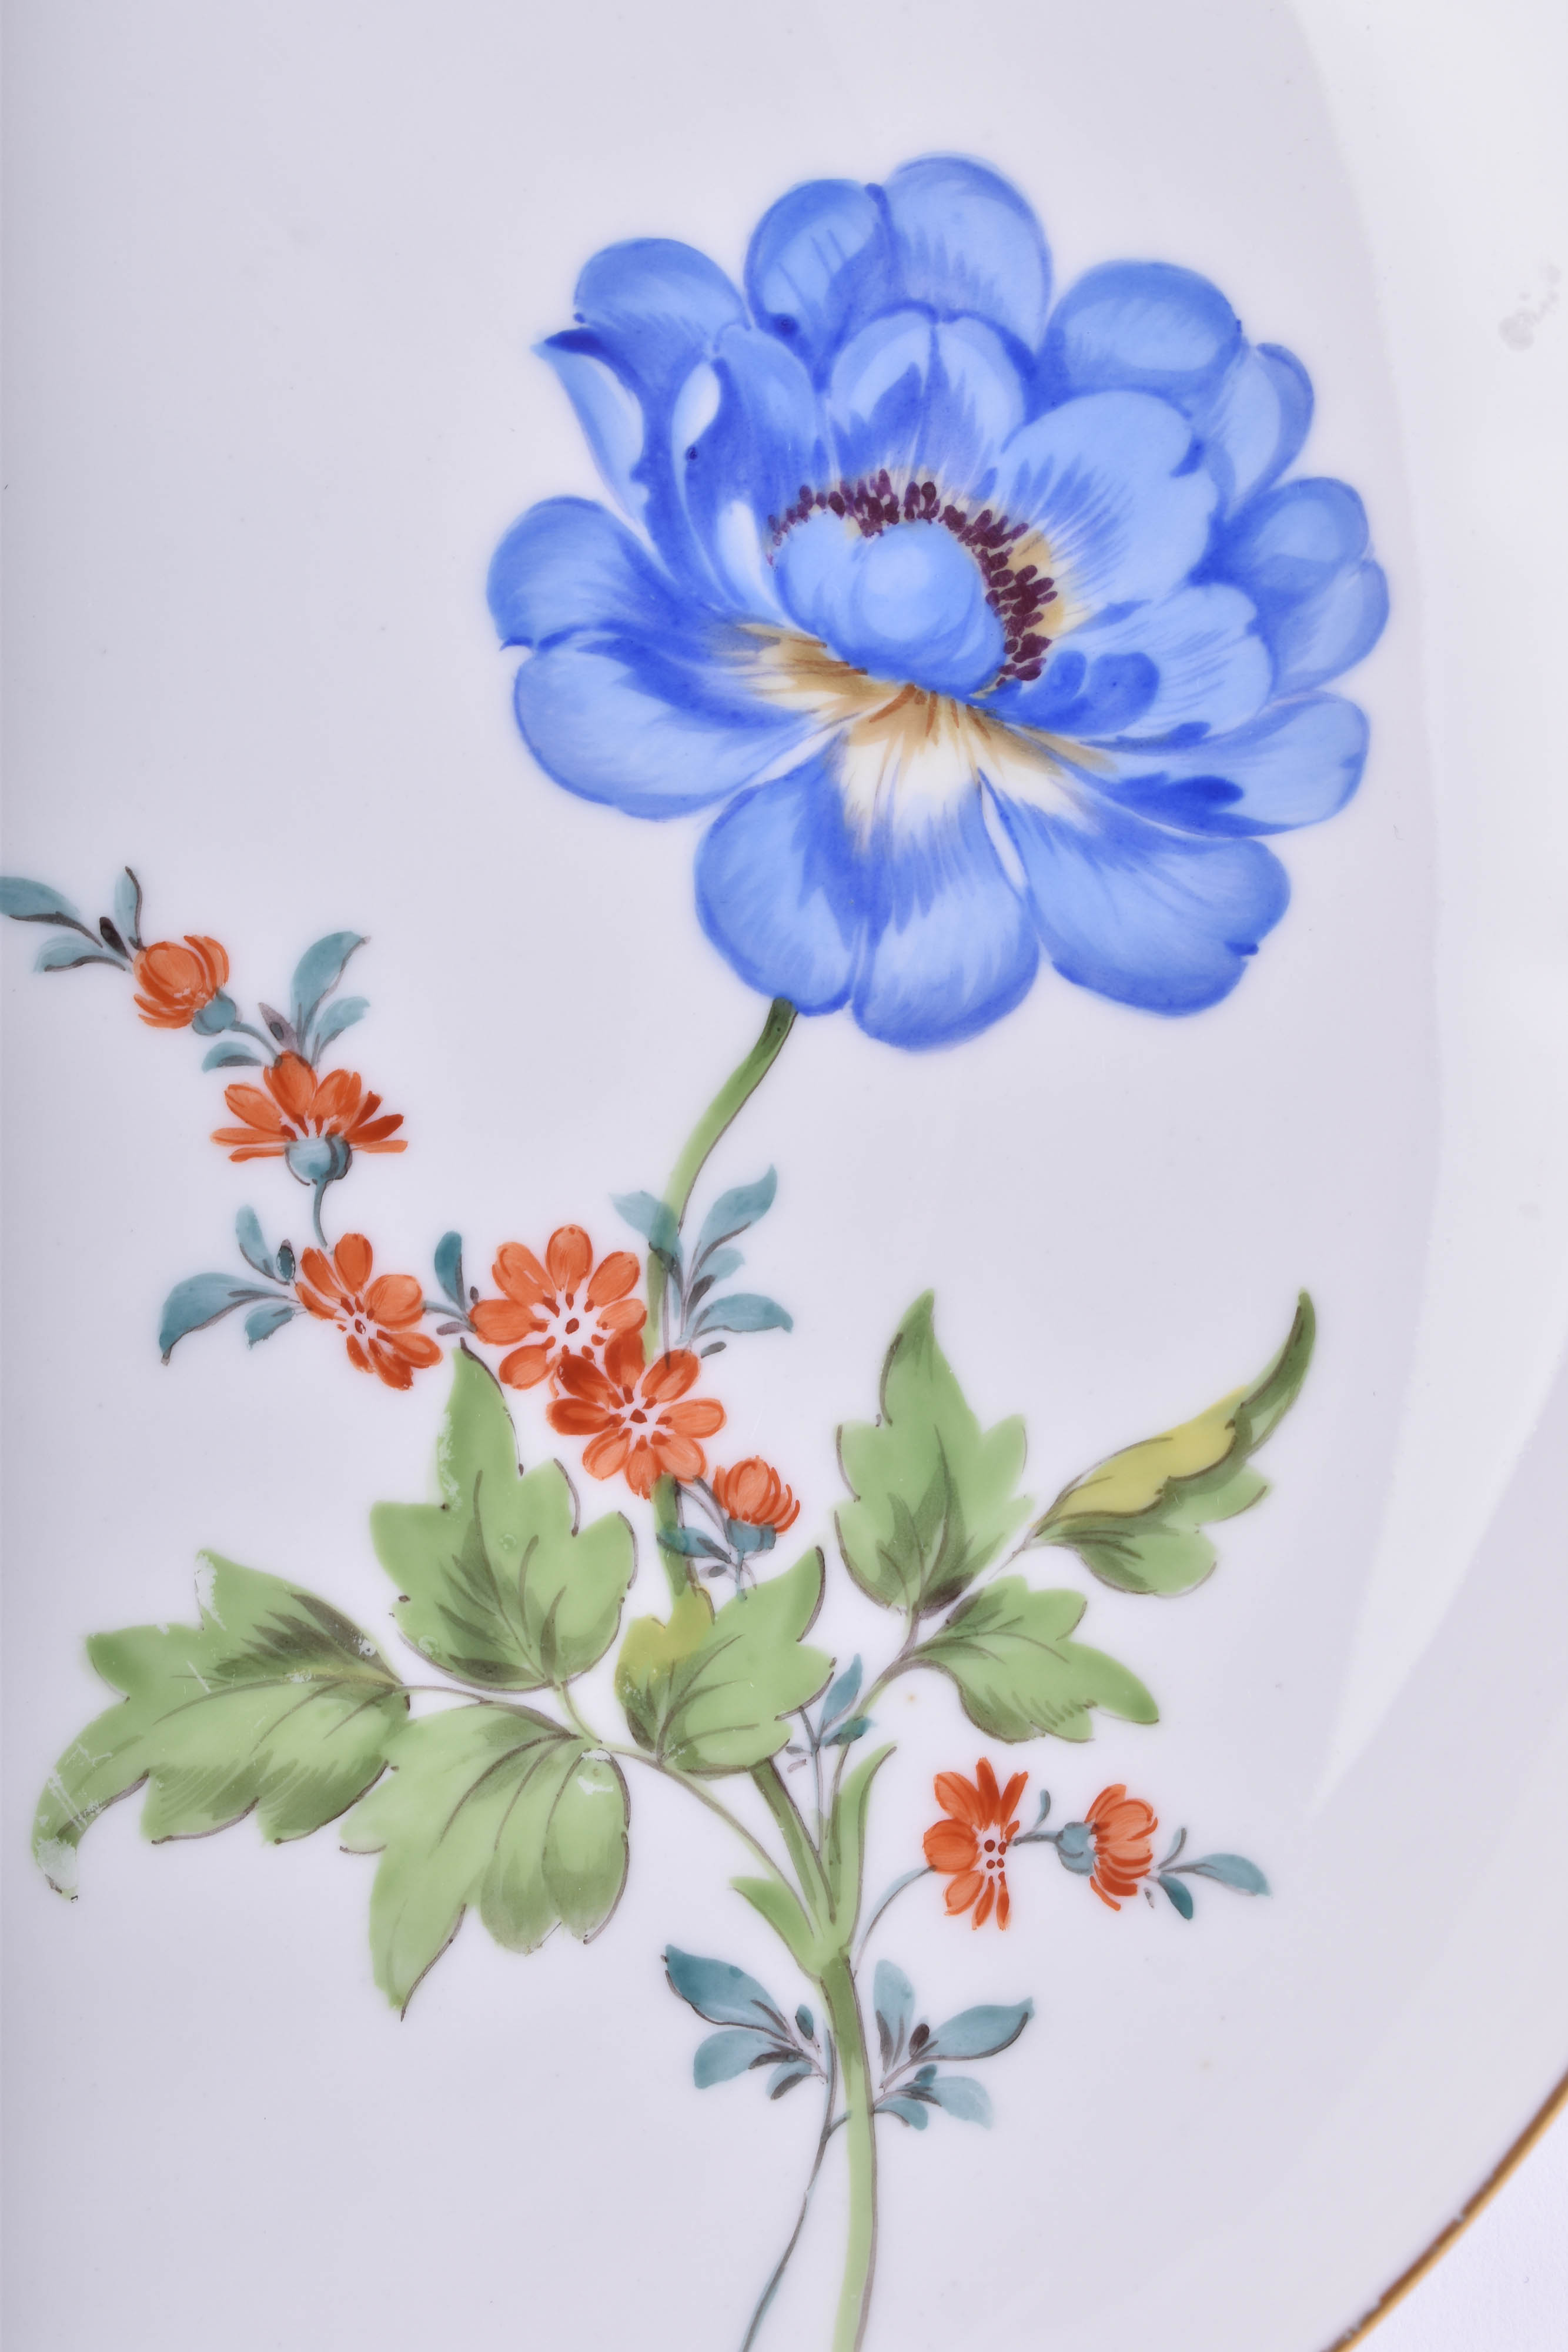  Cake plate Meissen - Image 2 of 4